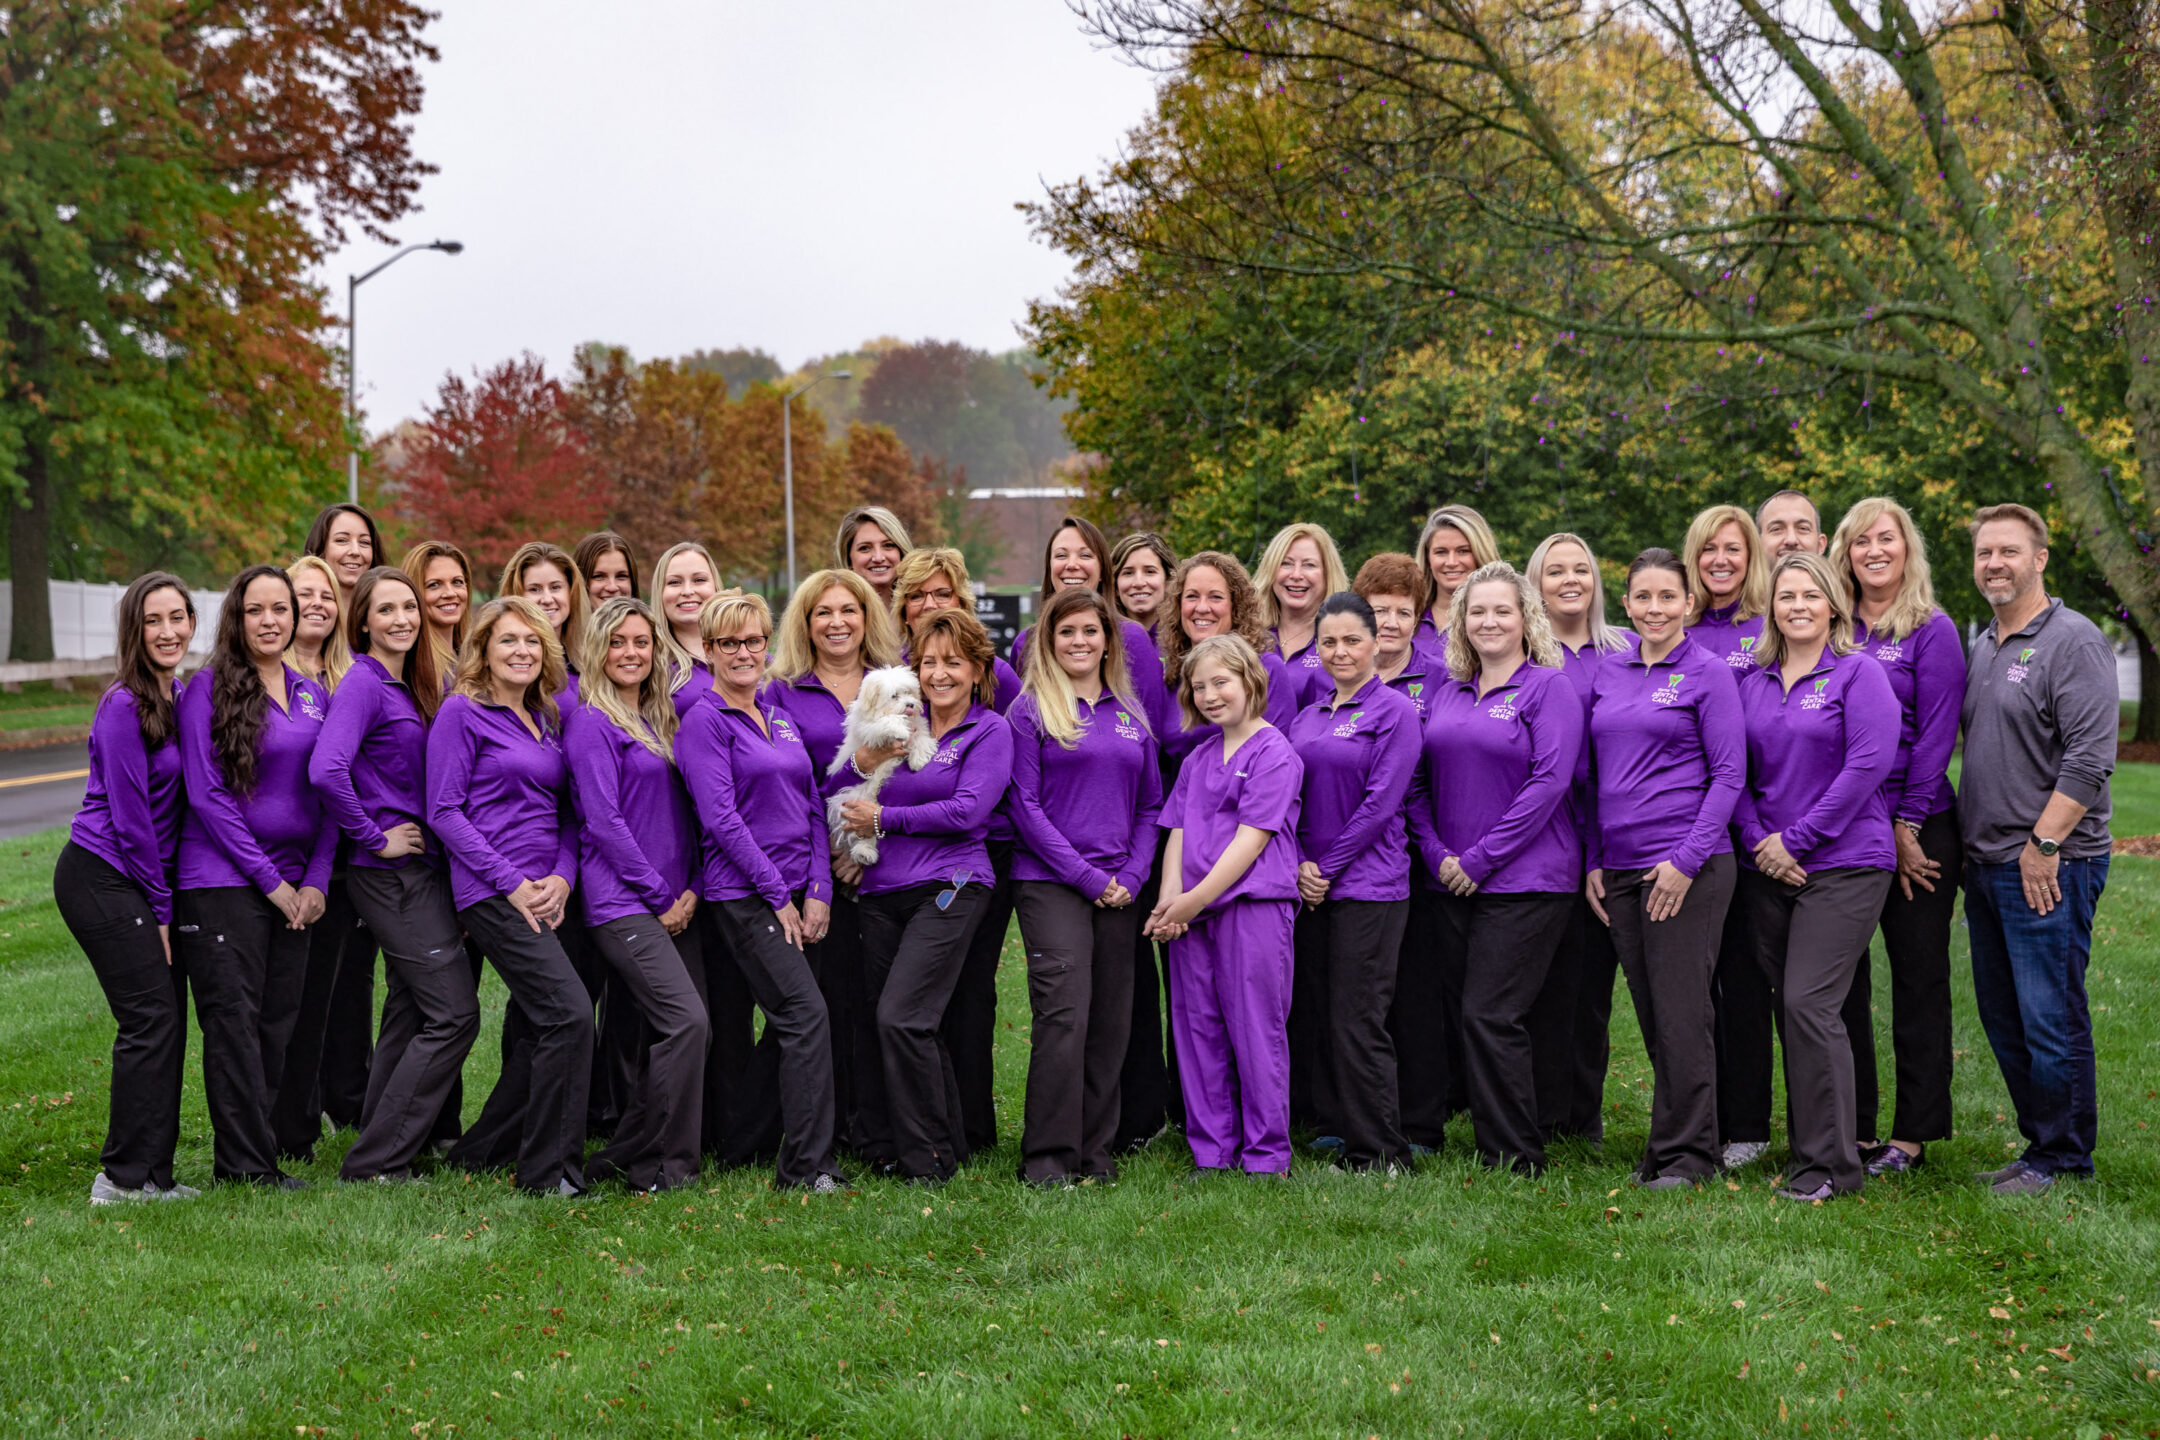  A photo of the team at Newtown Dentistry in Newtown, Pennsylvania.